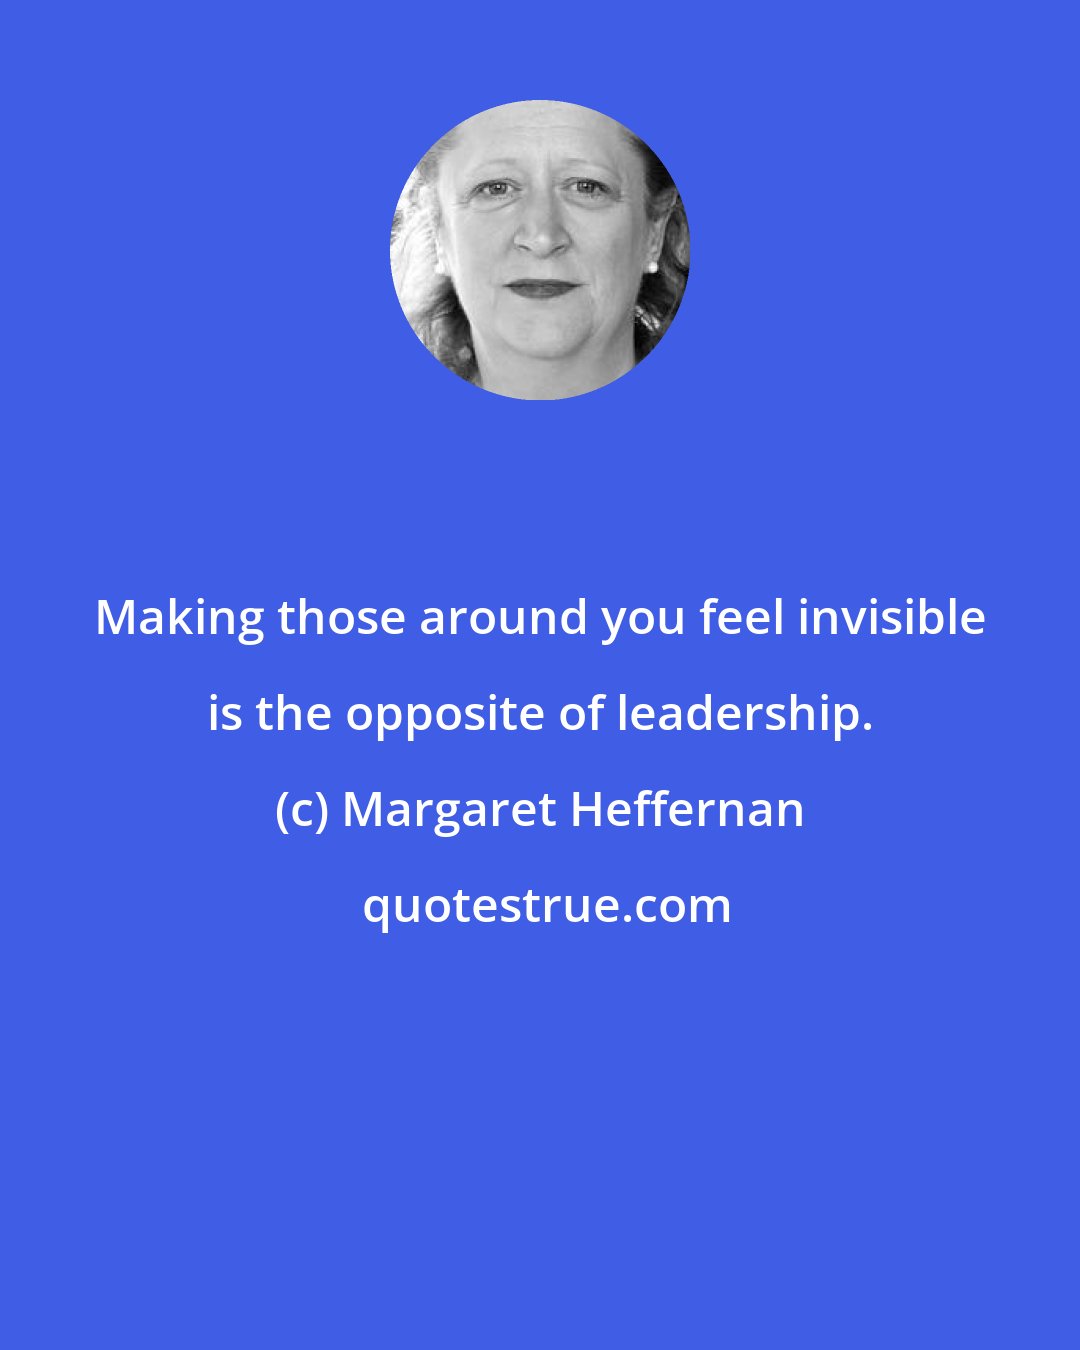 Margaret Heffernan: Making those around you feel invisible is the opposite of leadership.